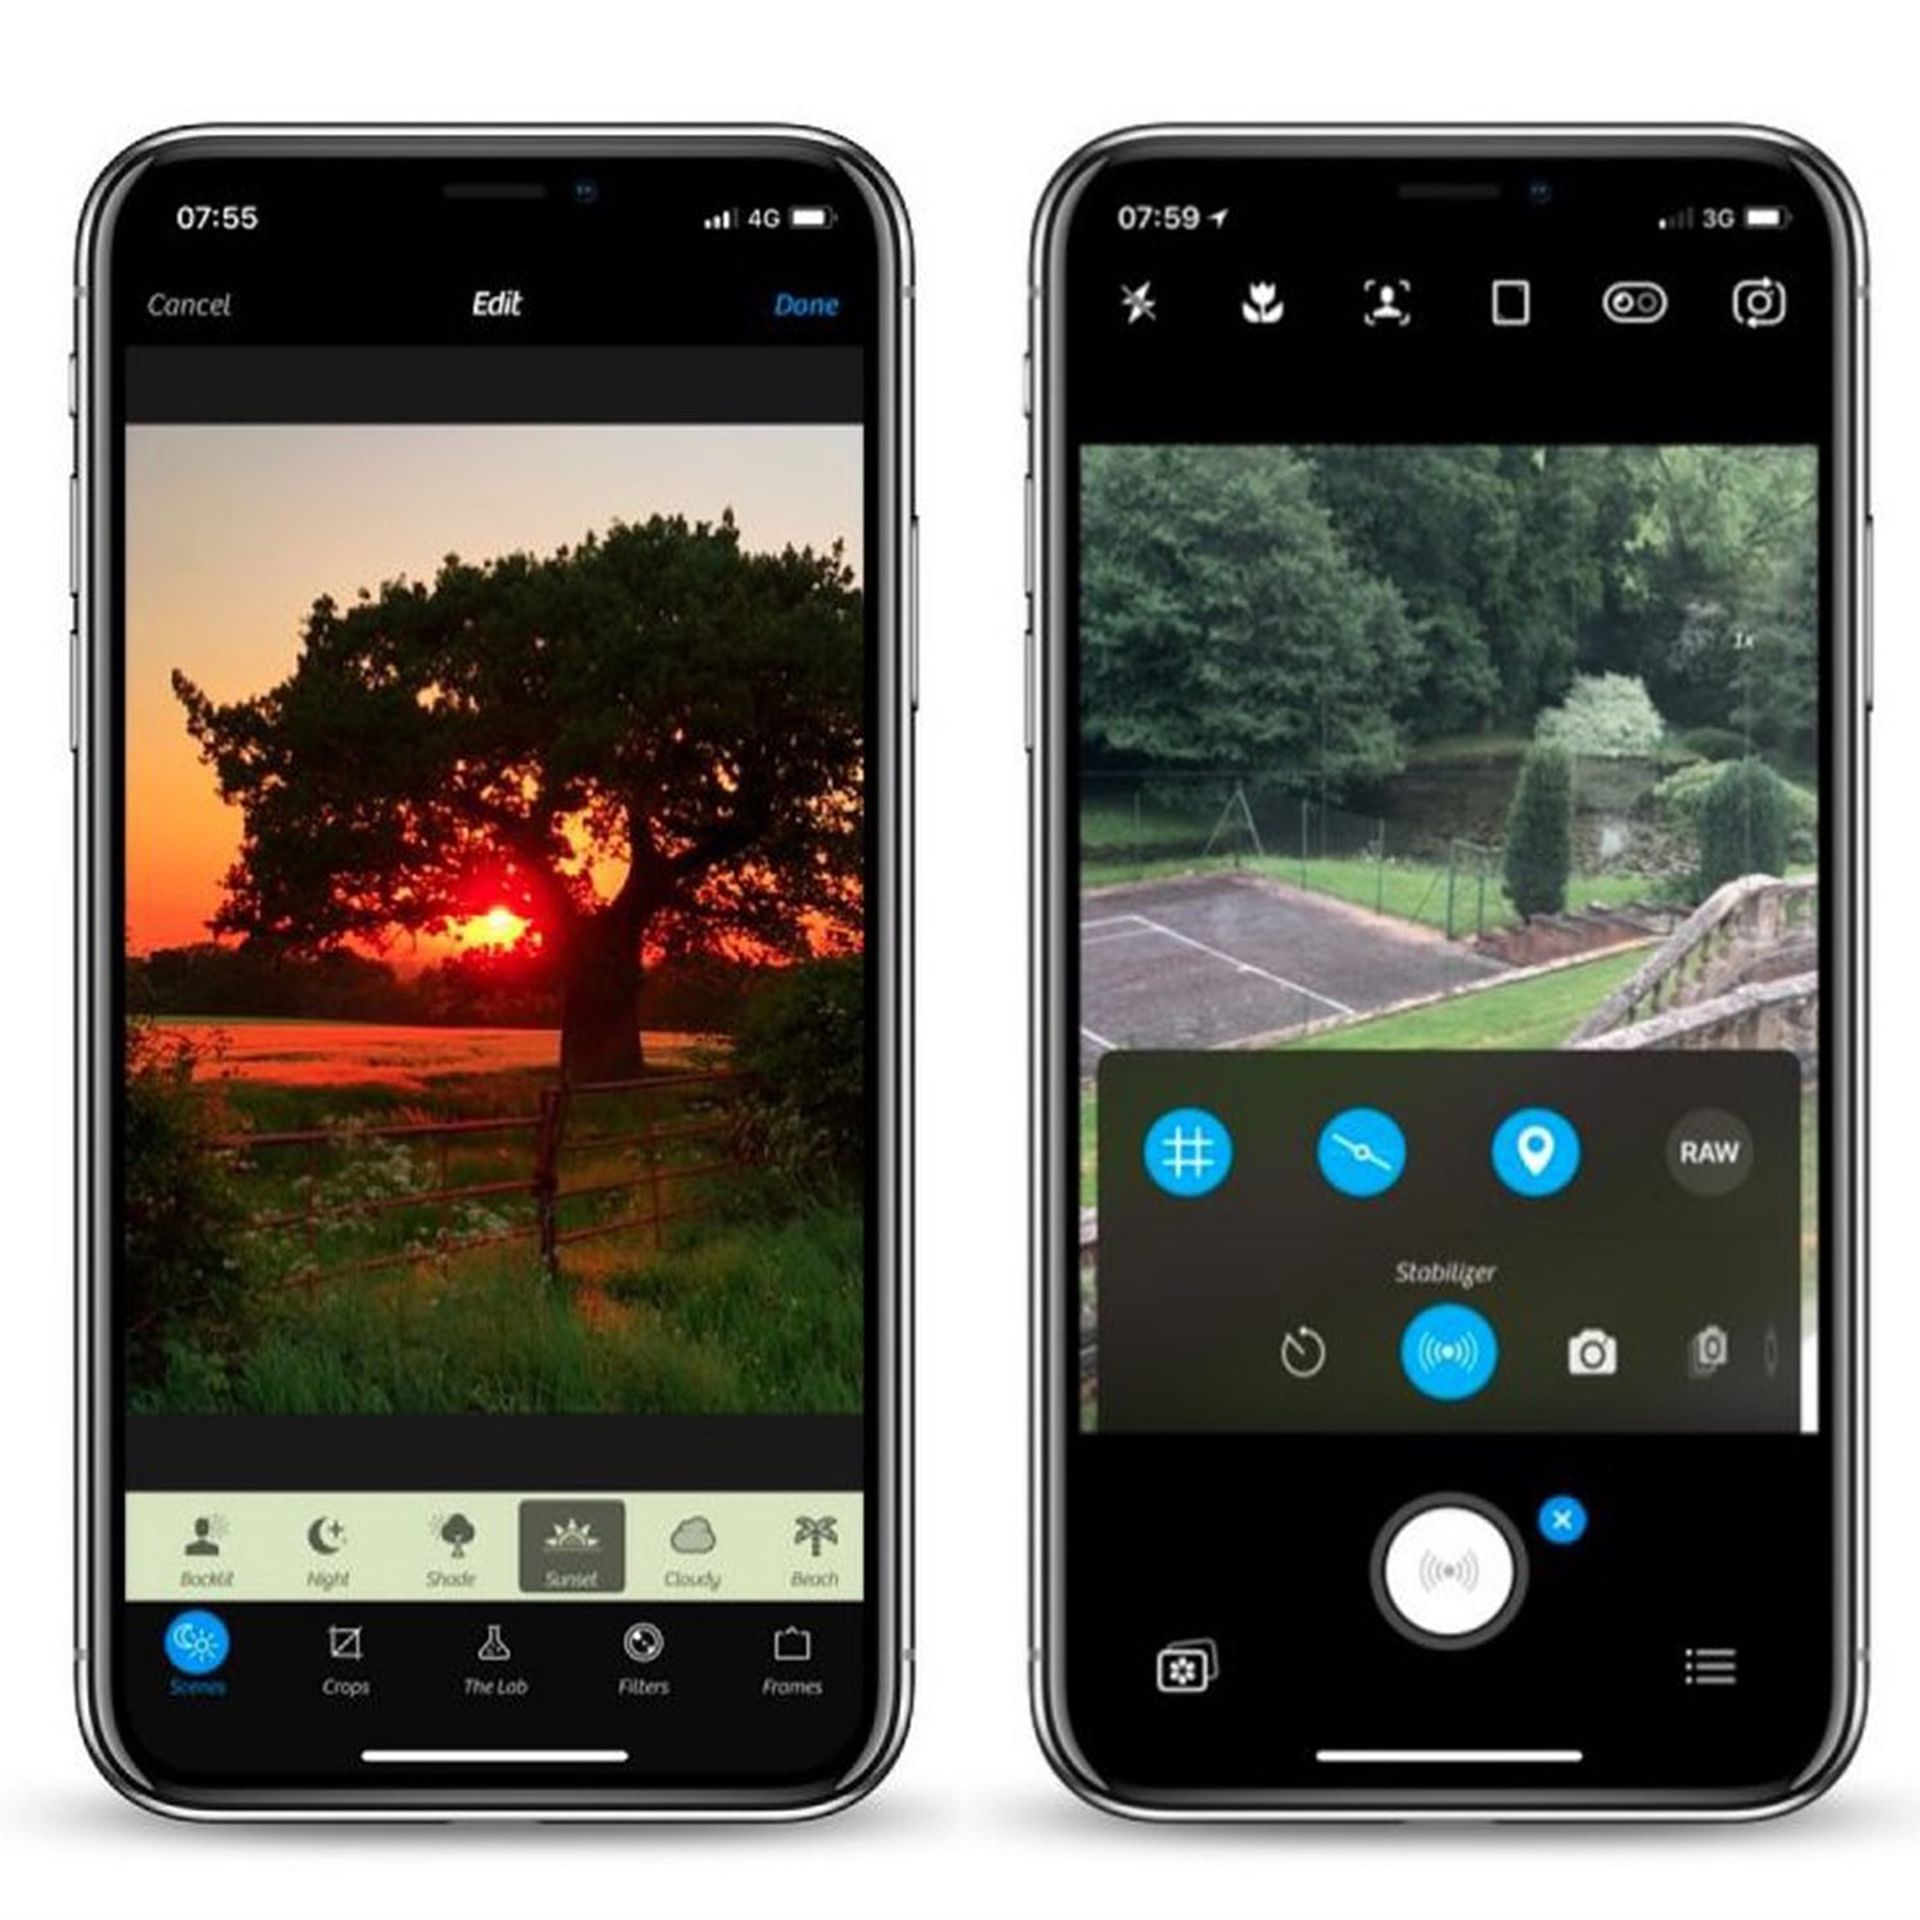 In this article, we are going to be covering the new update for Camera+ 2, allowing users to use the upscale feature that can take photos up to 48 MP.